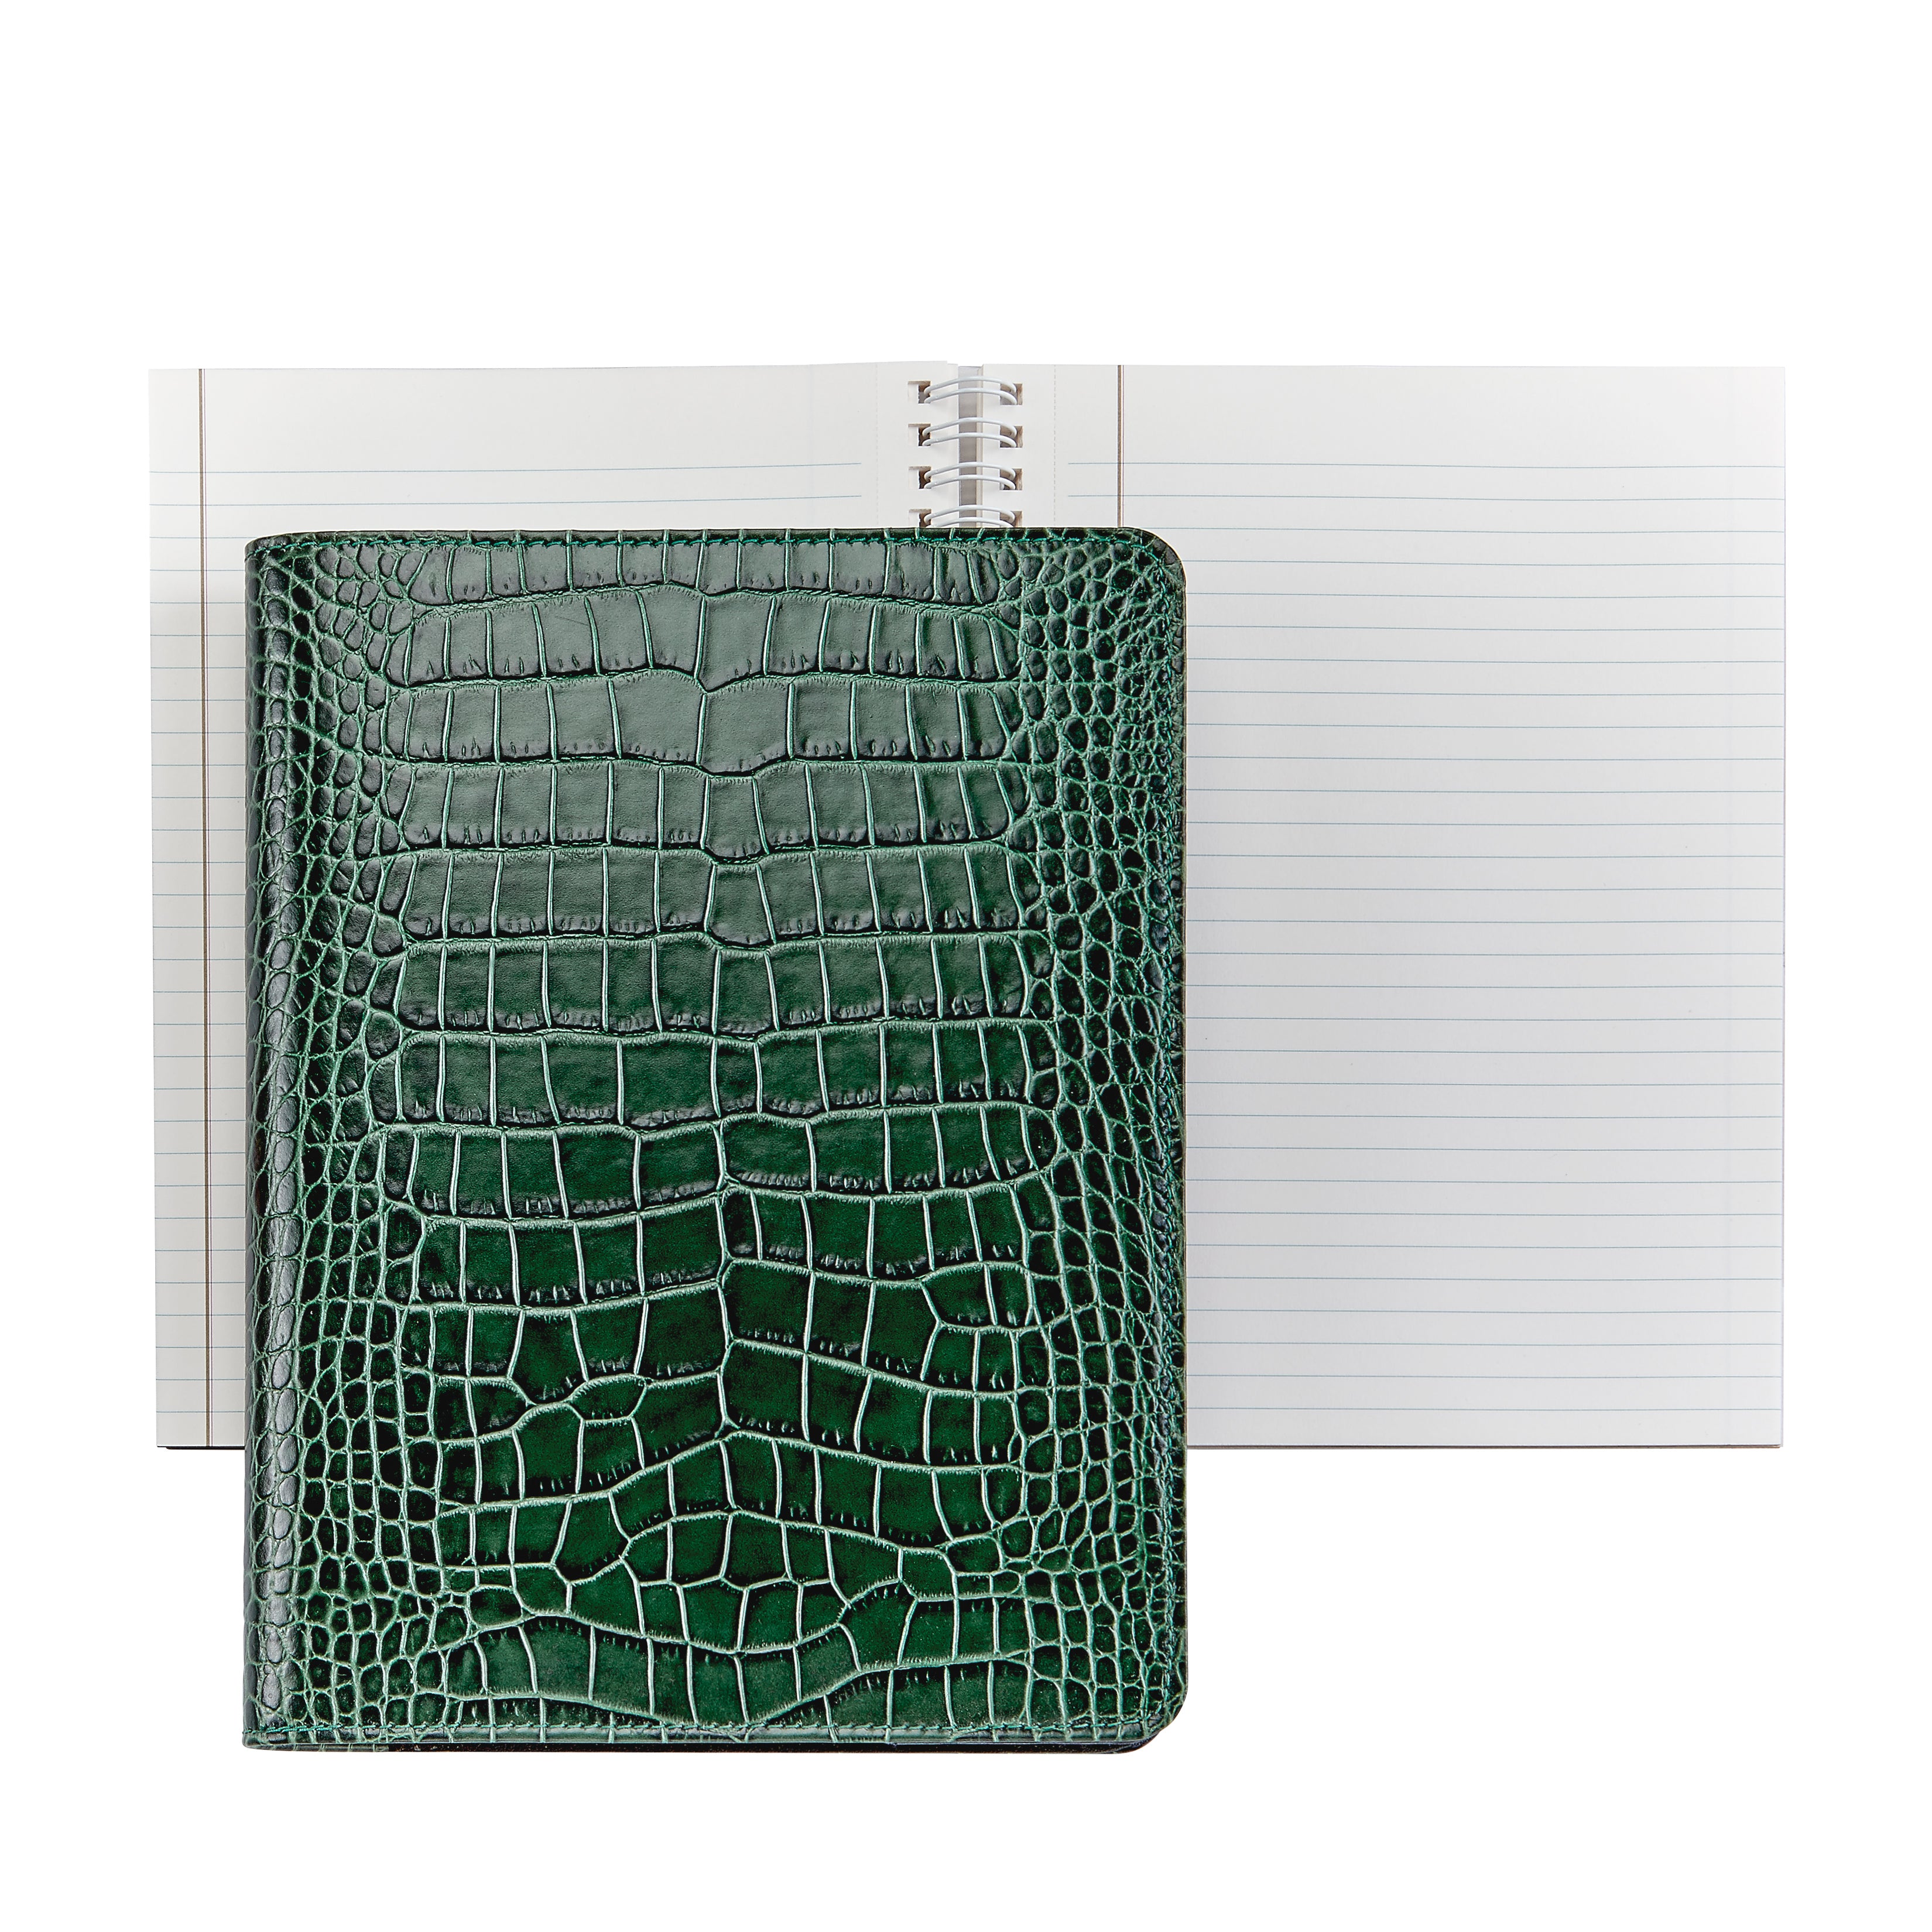 Graphic Image 9 Wire-O-Notebook Emerald Crocodile Embossed Leather